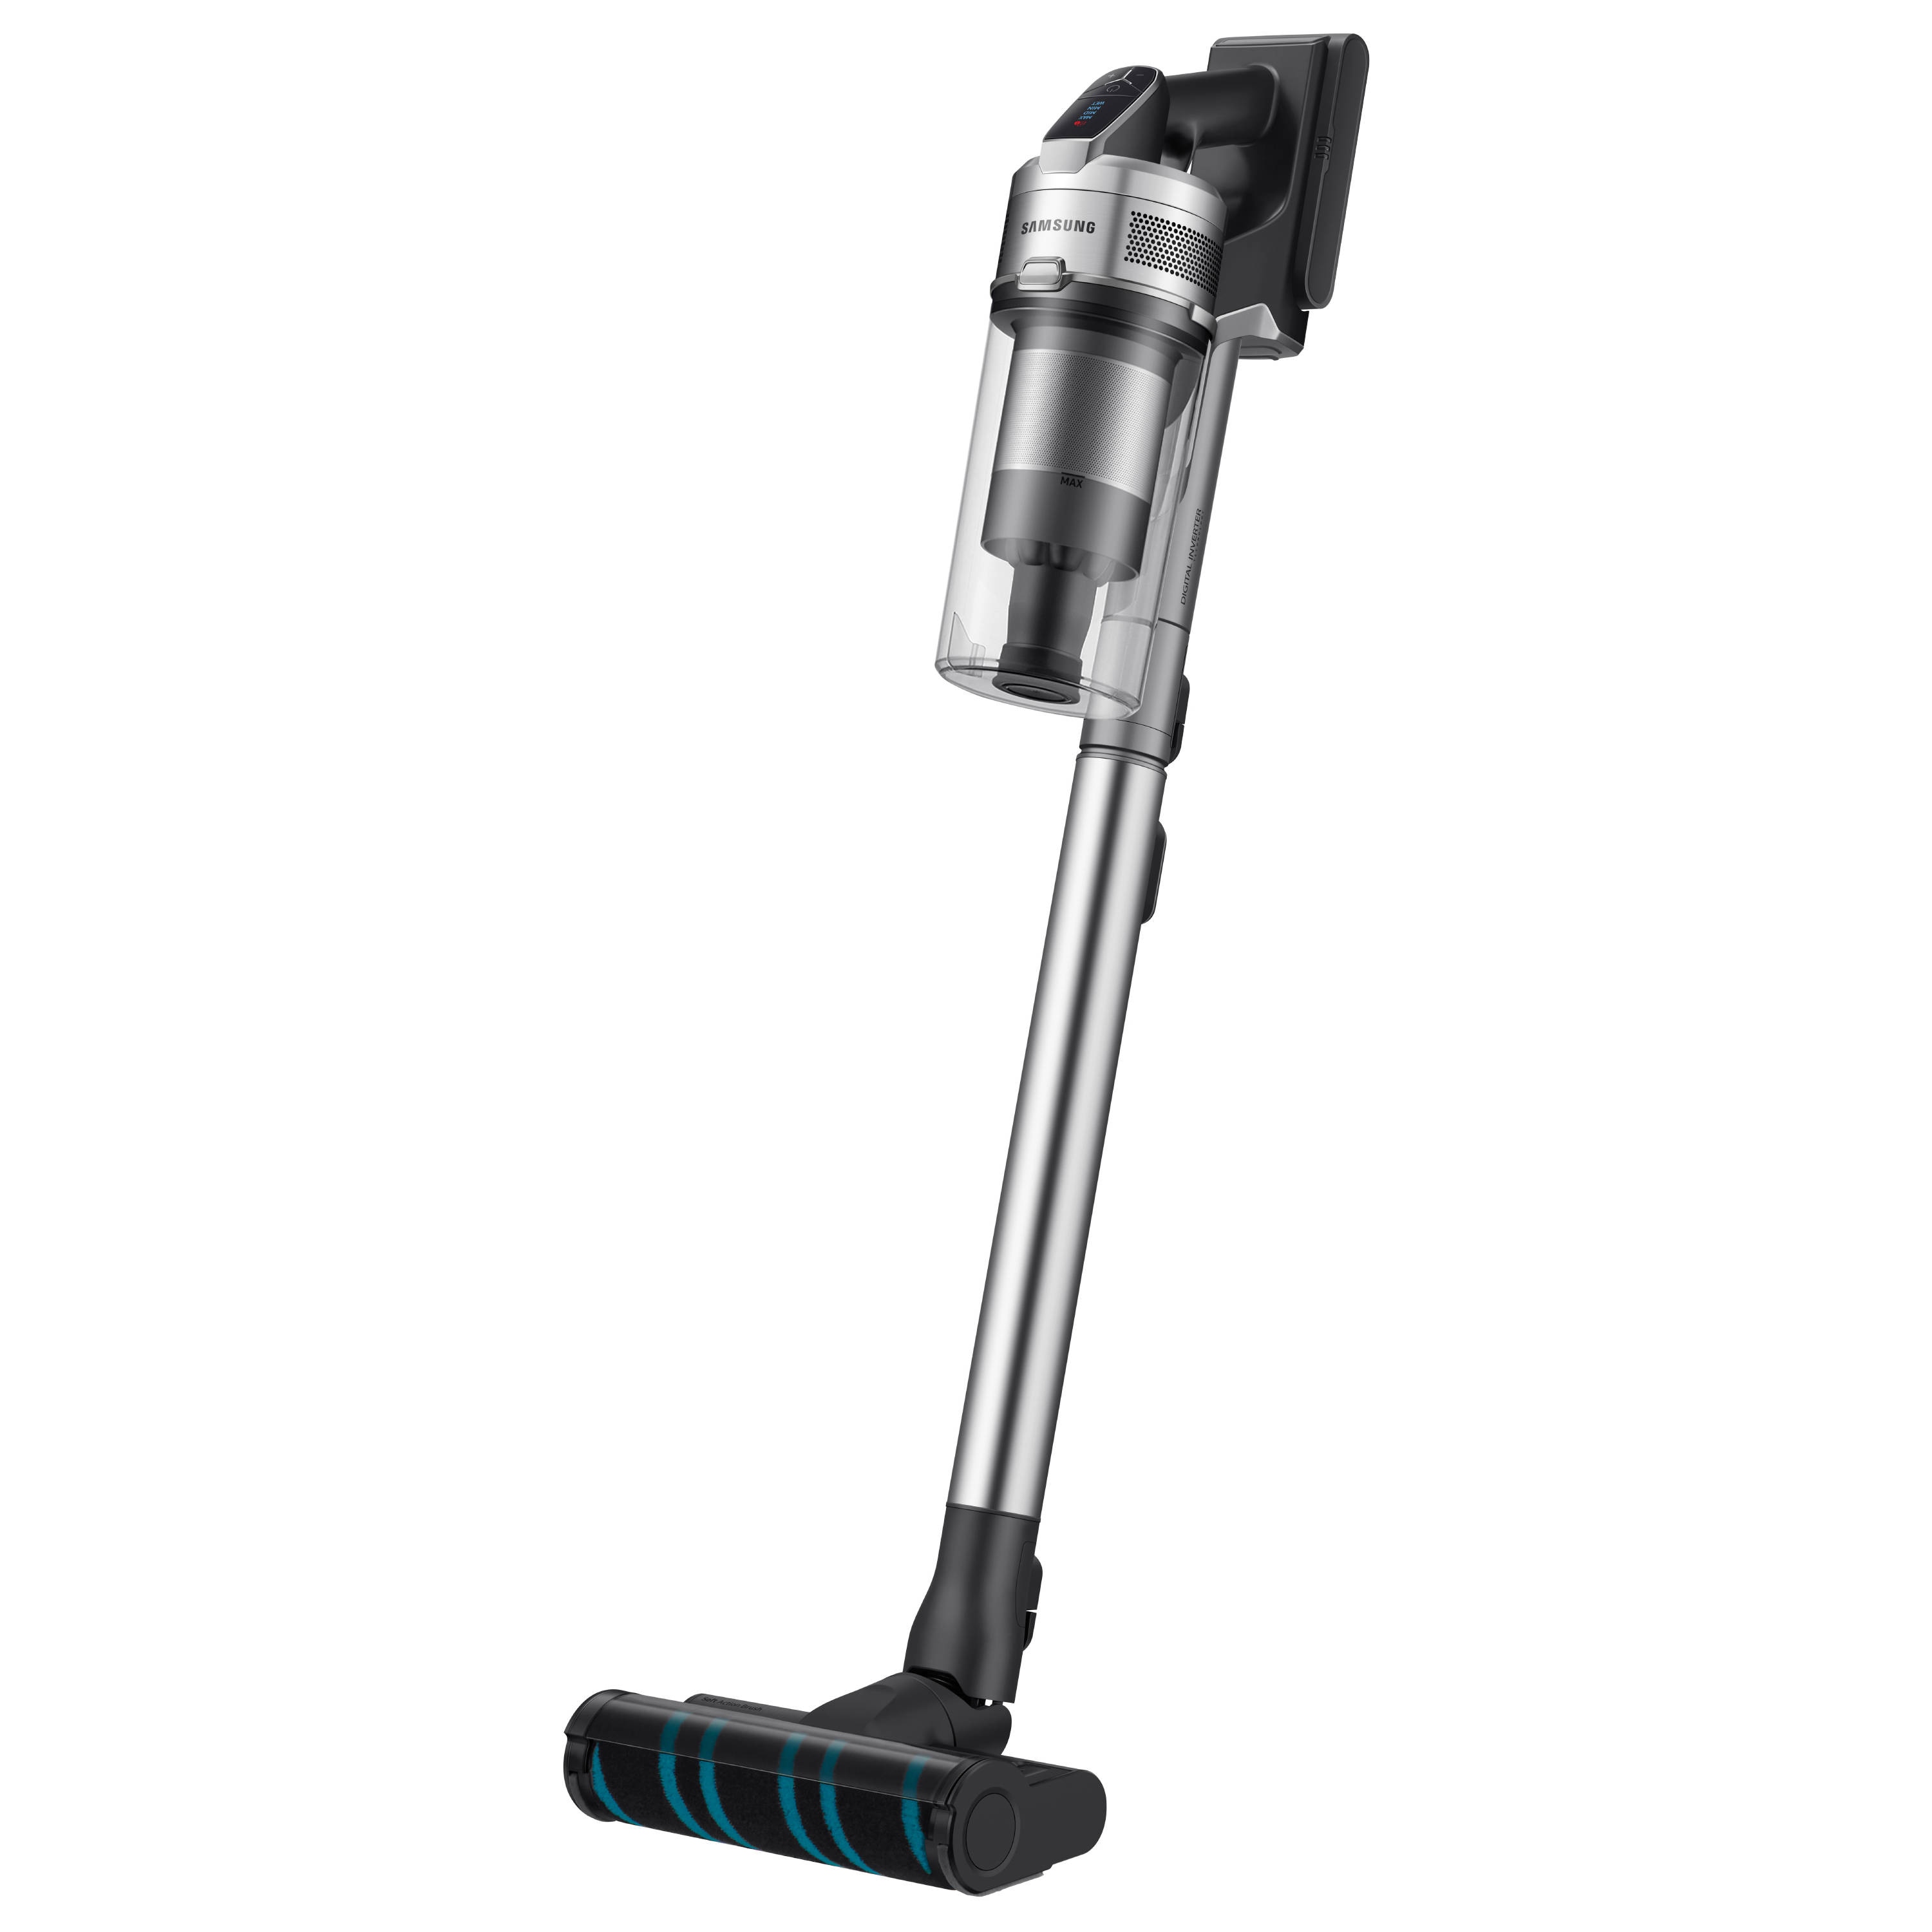 Volt and 90 at Pet Stick Station 21.9 Vacuum Stick the department Cordless Jet Bundle Clean (Convertible in Vacuums Samsung To Handheld)